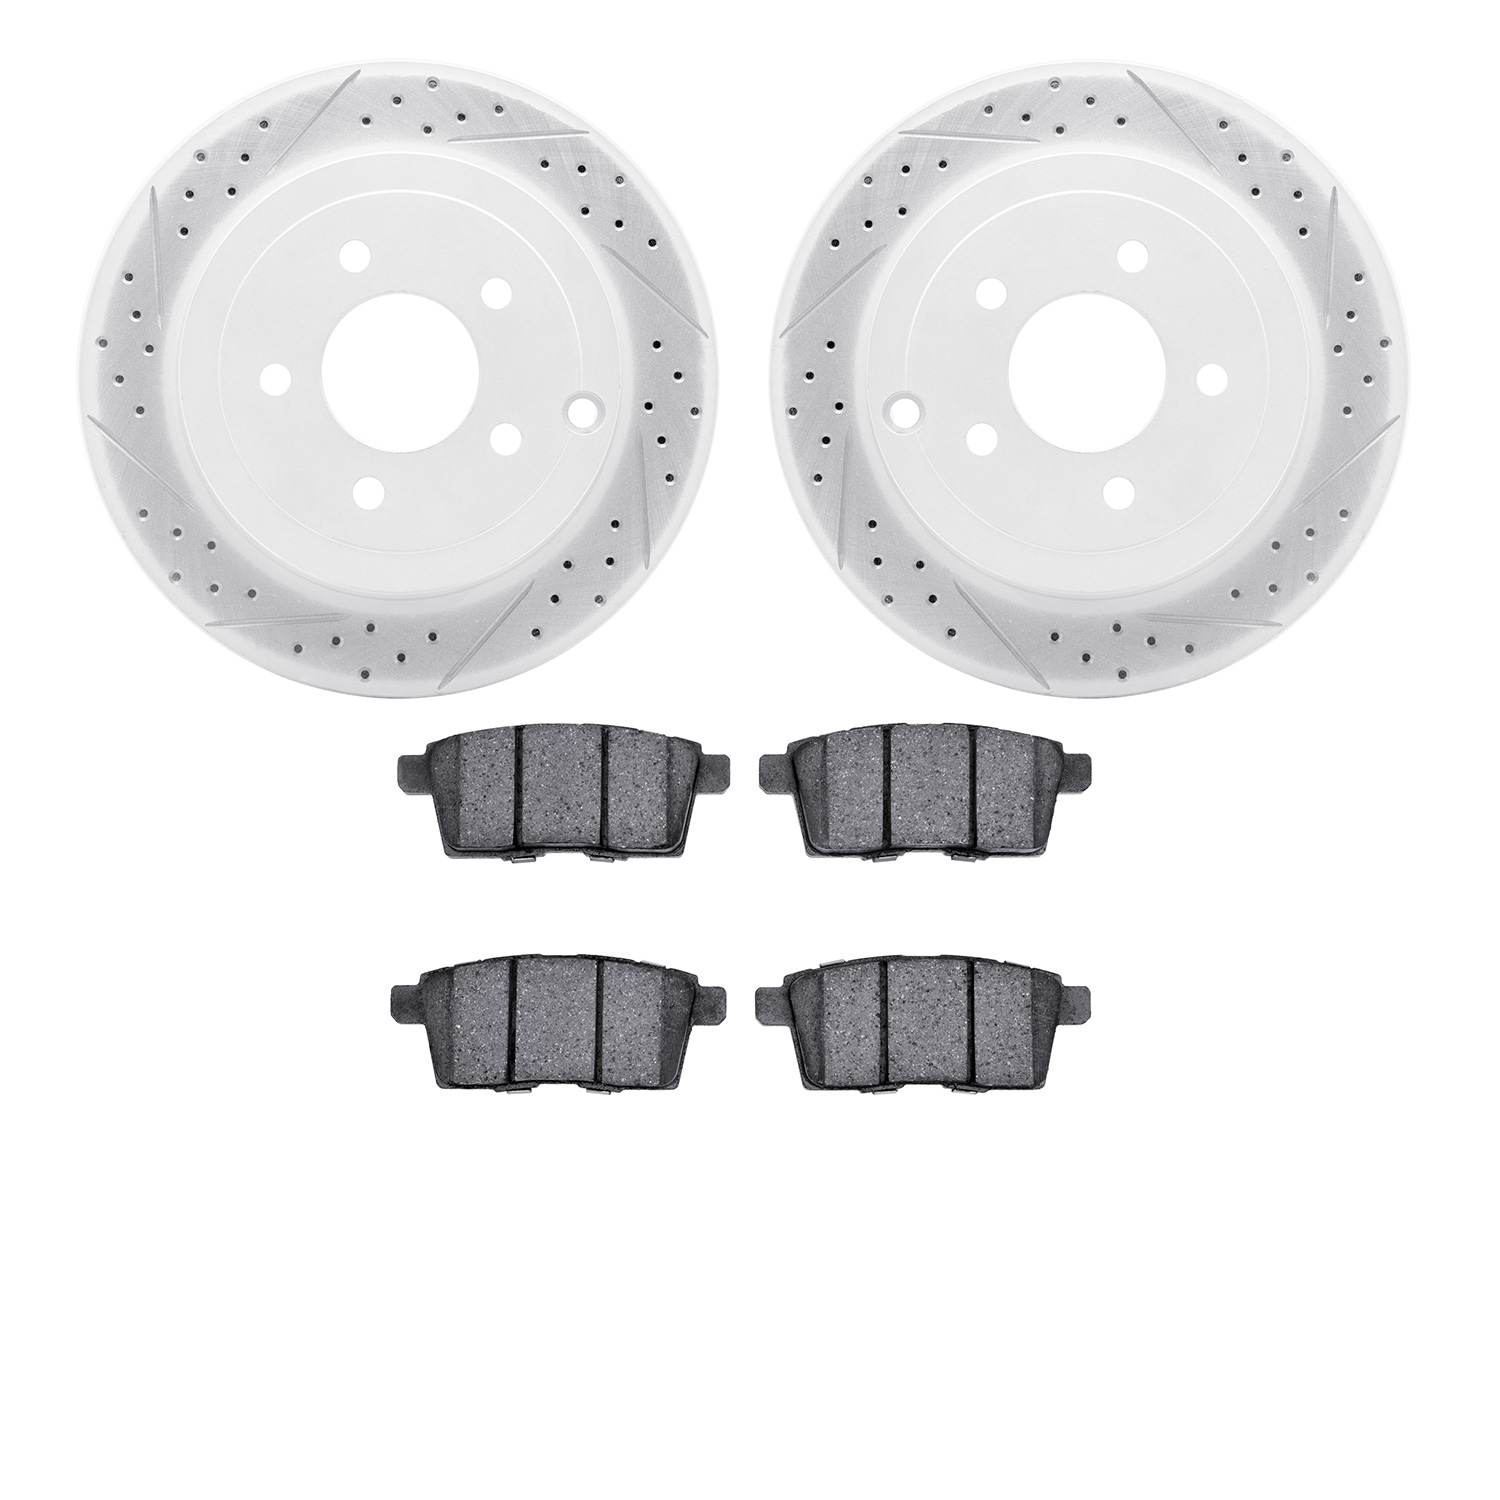 2502-54190 Geoperformance Drilled/Slotted Rotors w/5000 Advanced Brake Pads Kit, 2007-2010 Ford/Lincoln/Mercury/Mazda, Position: